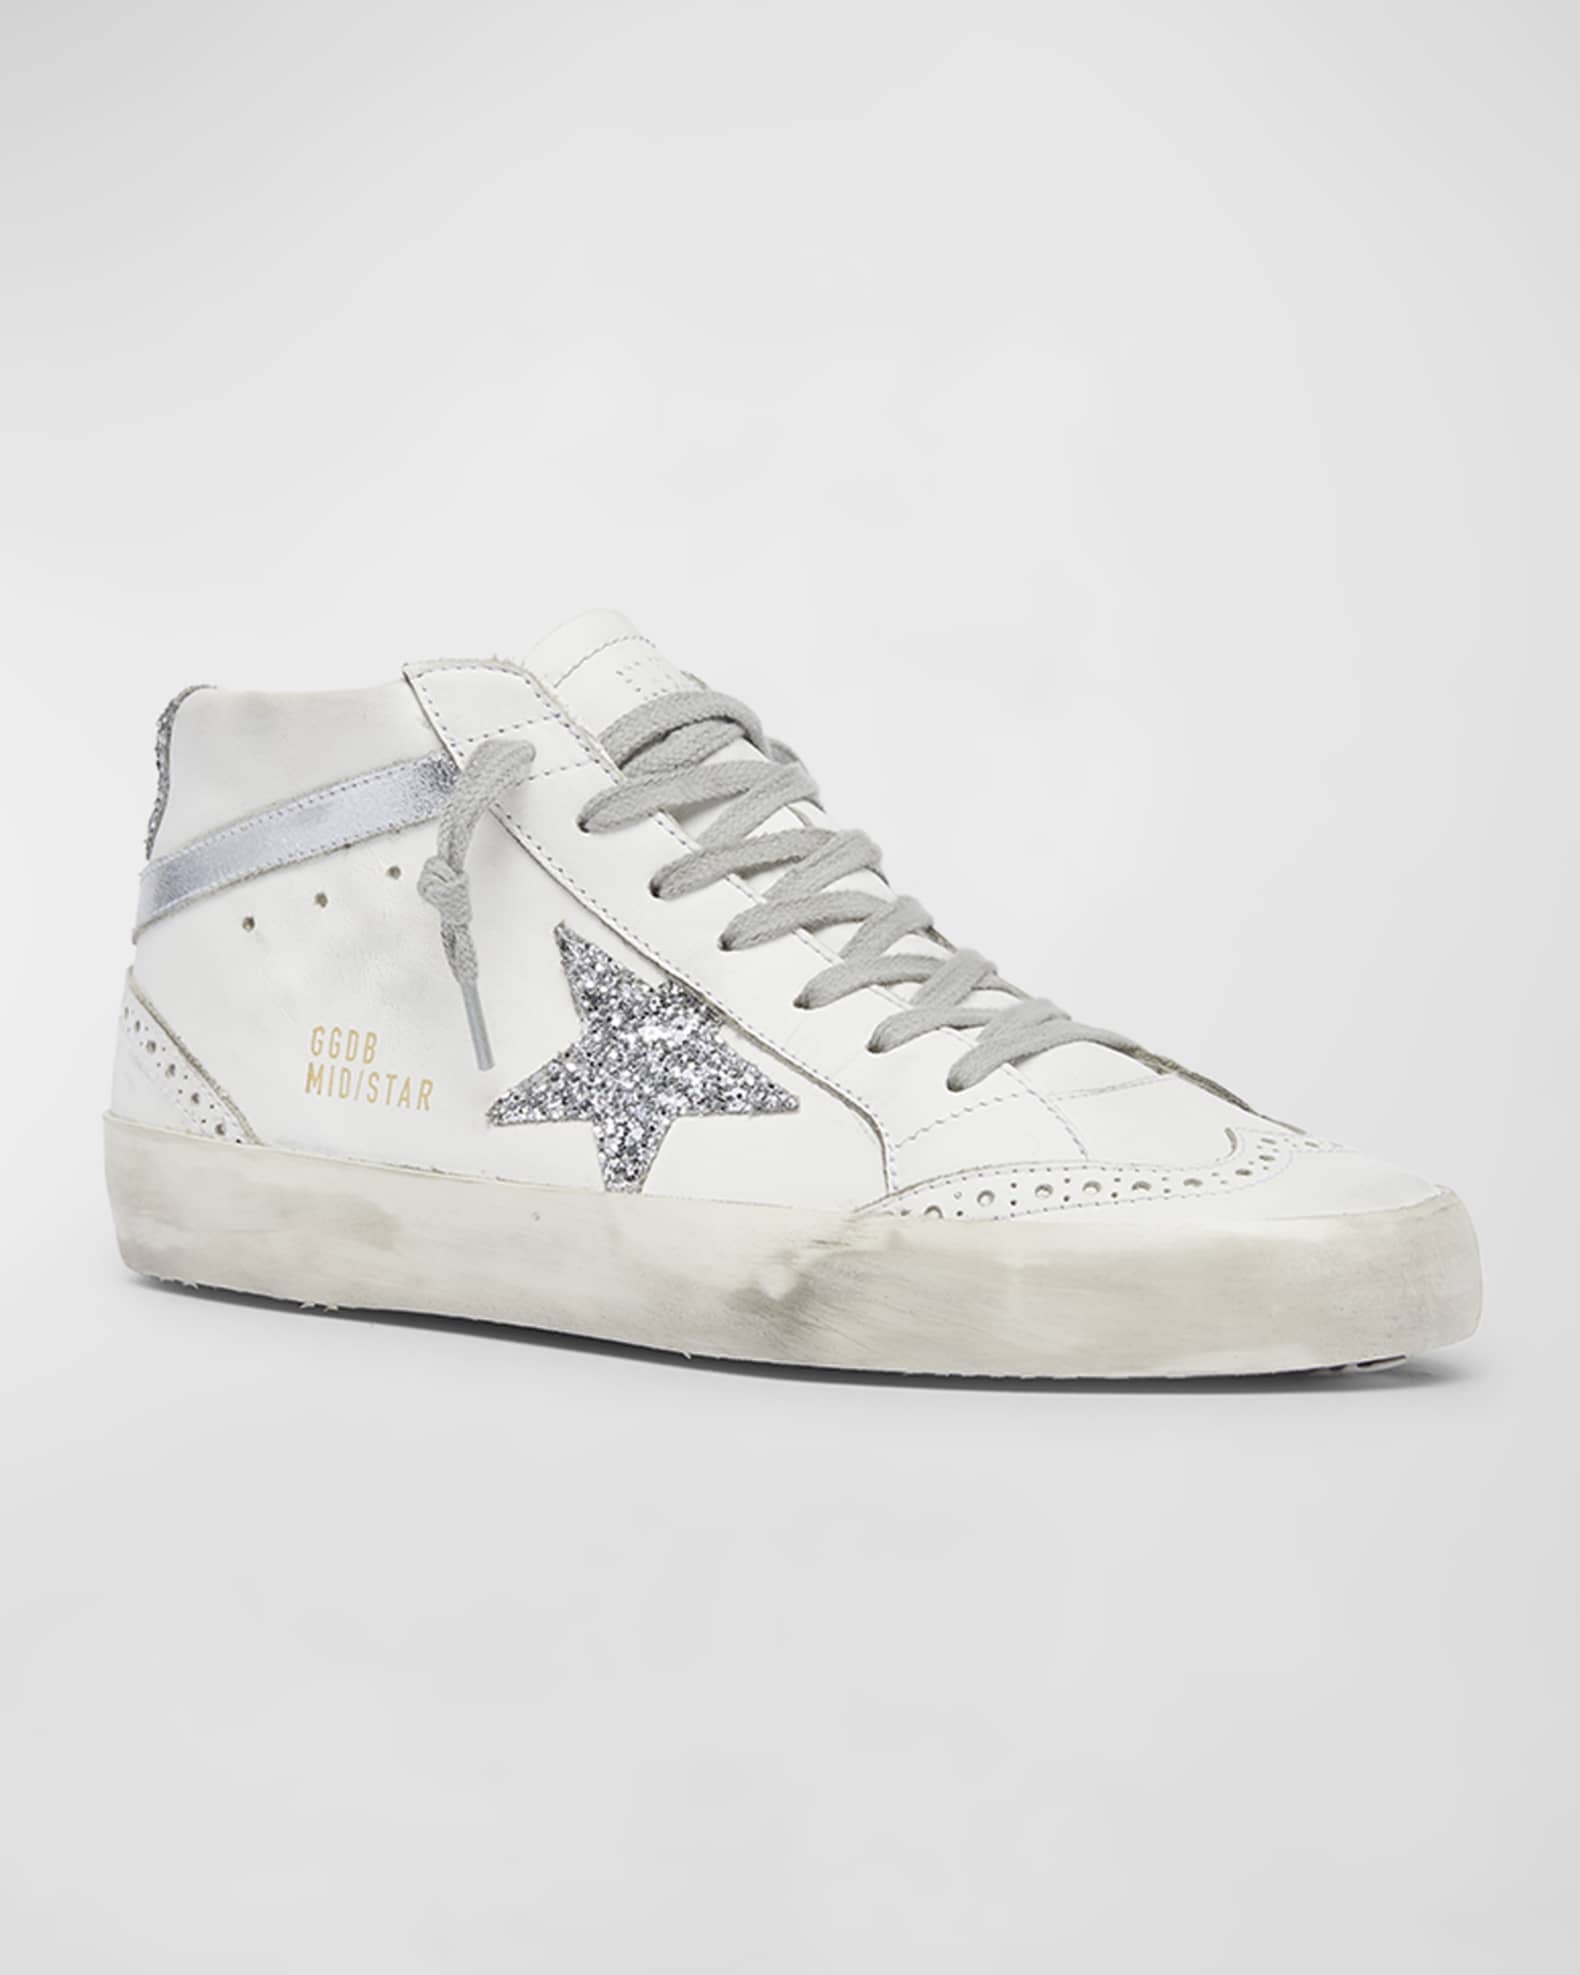 Golden Goose Mid Star Classic Glitter Leather Sneakers | Neiman Marcus